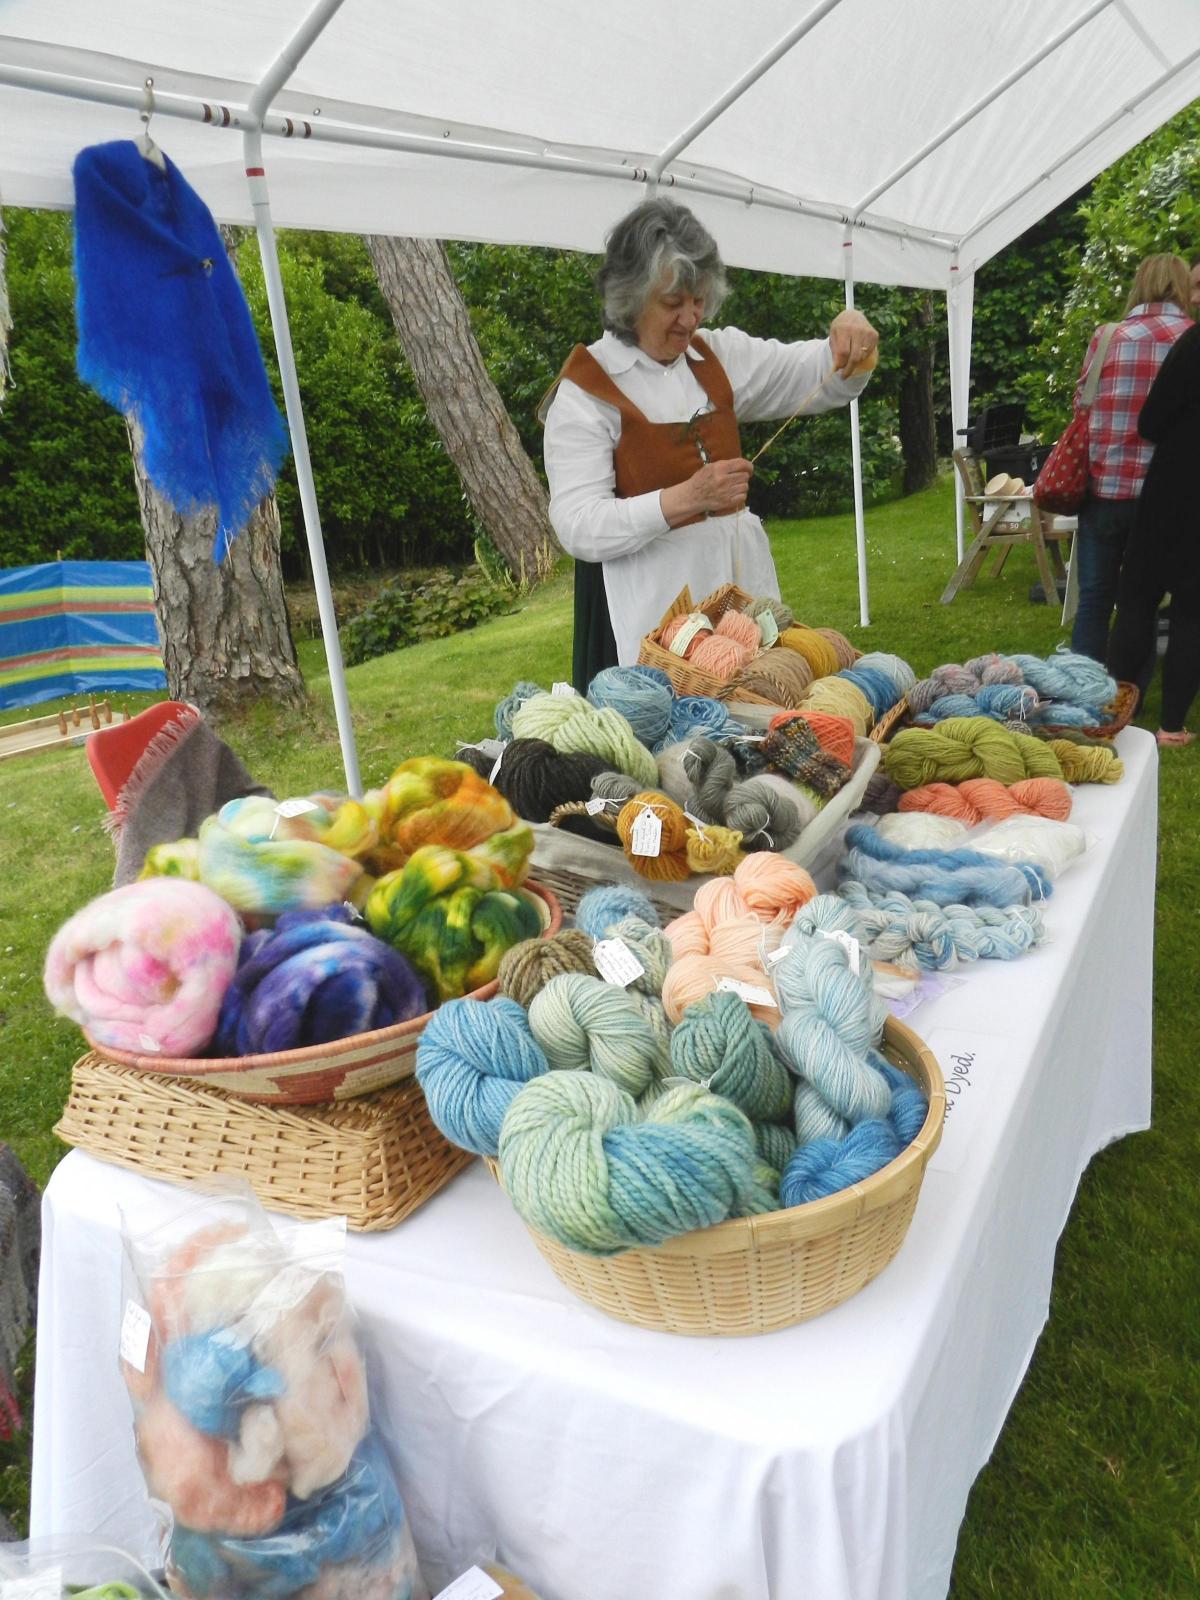 Local spinners, weavers and dyers had a stall featuring wool coloured with natural plant dyes at Llandstadwell Medieval Fayre, Saturday June 20, 2015. 
PICTURE: Western Telegraph/Milford Mercury